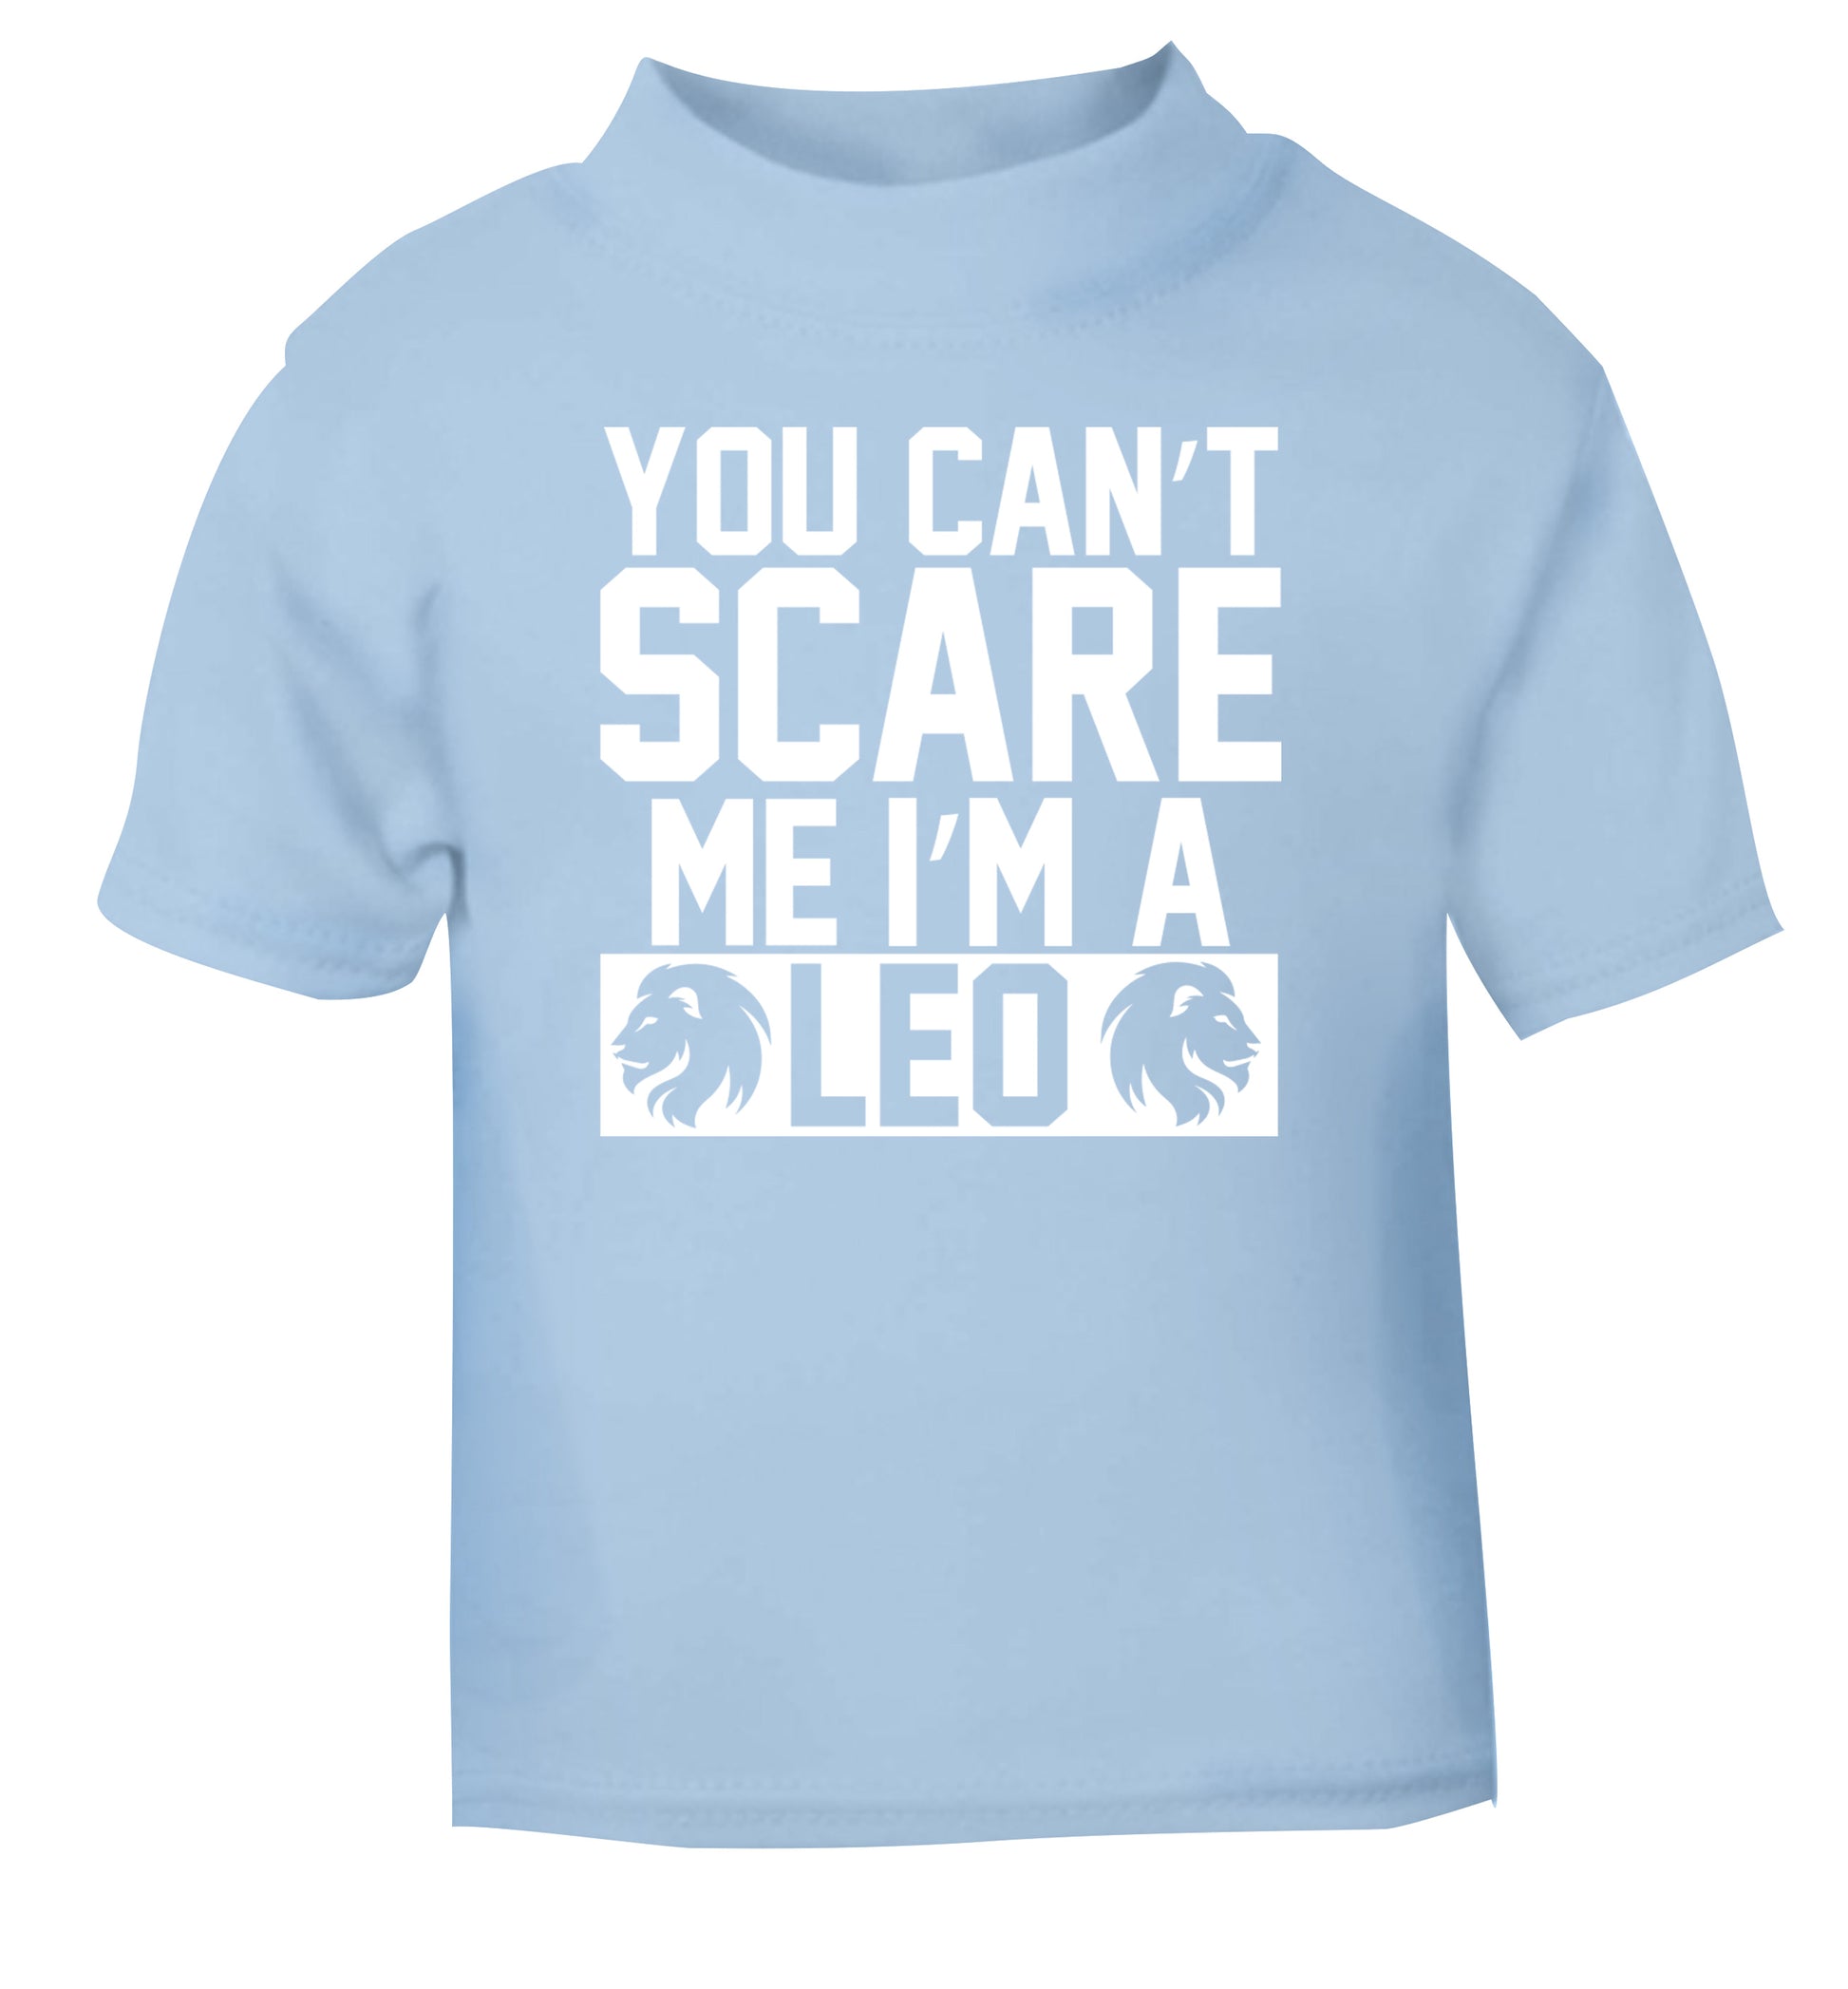 You can't scare me I'm a leo light blue Baby Toddler Tshirt 2 Years